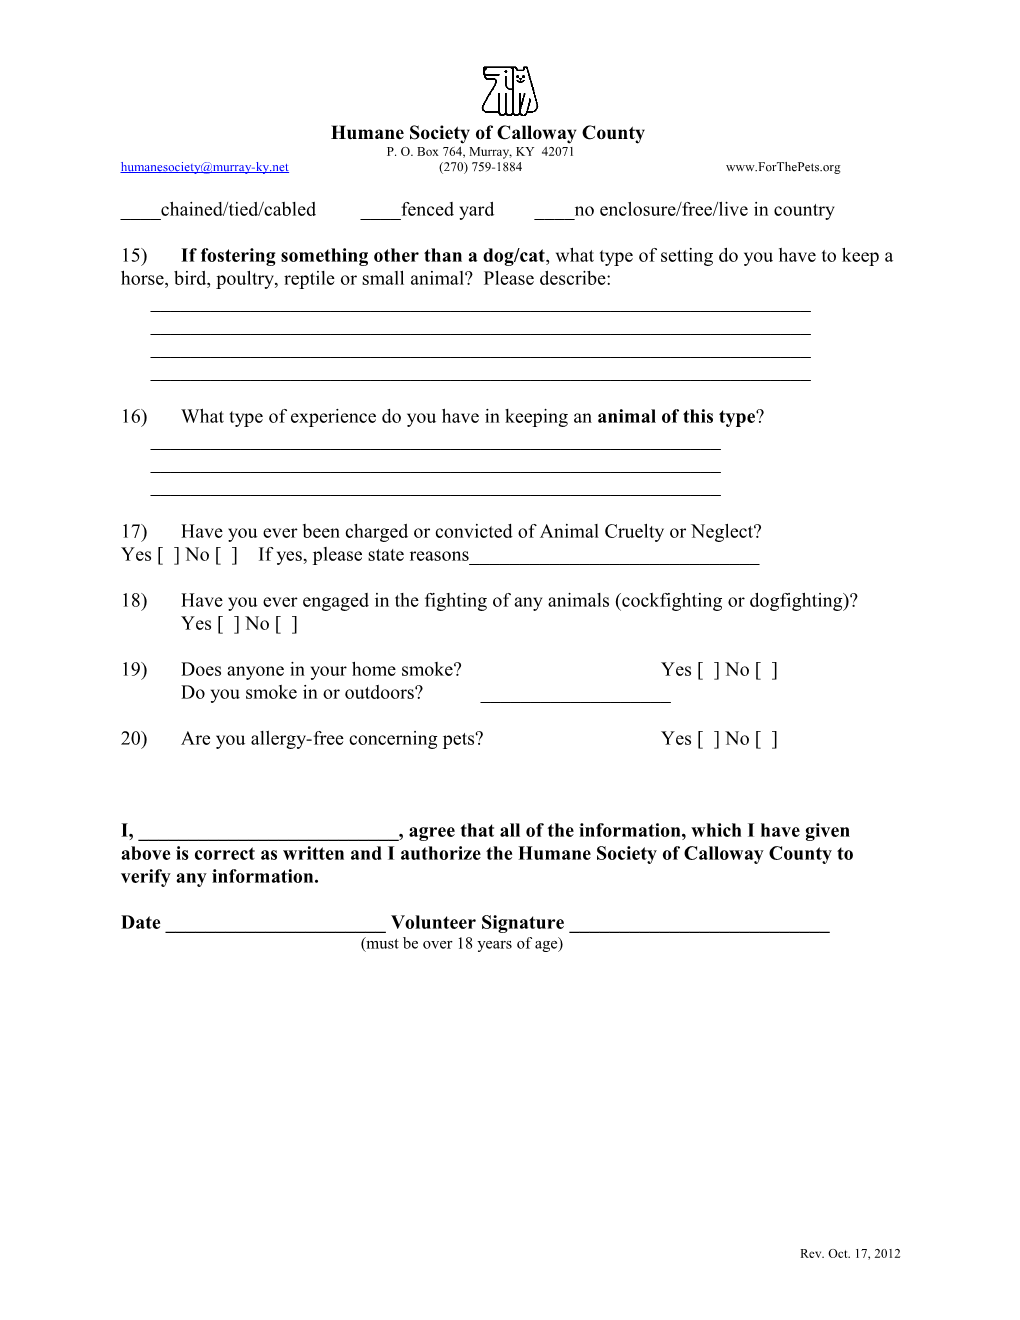 Foster Care Application s1